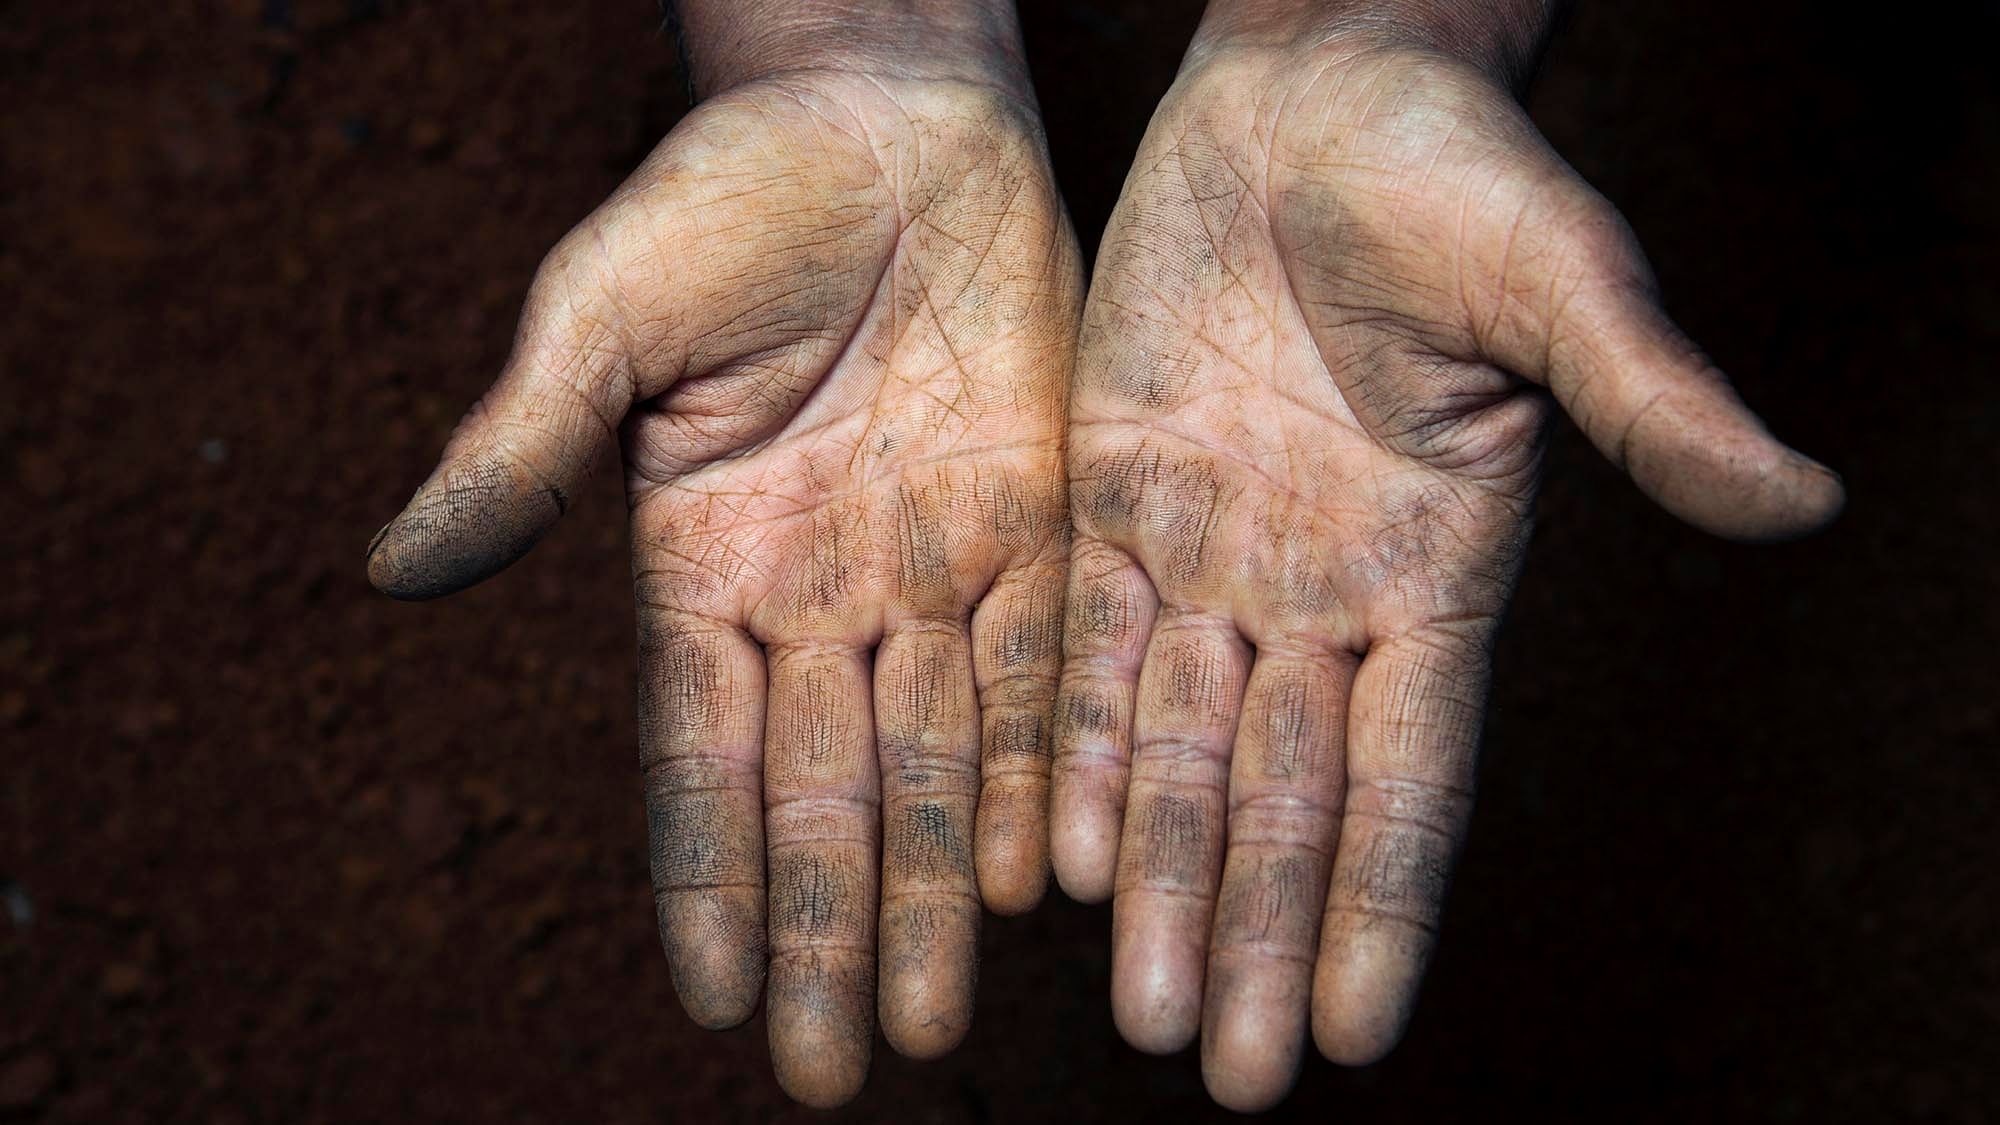 Some forms of slavery  are going under the radar with little action taken to tackle these crimes. (Photo: iStock)